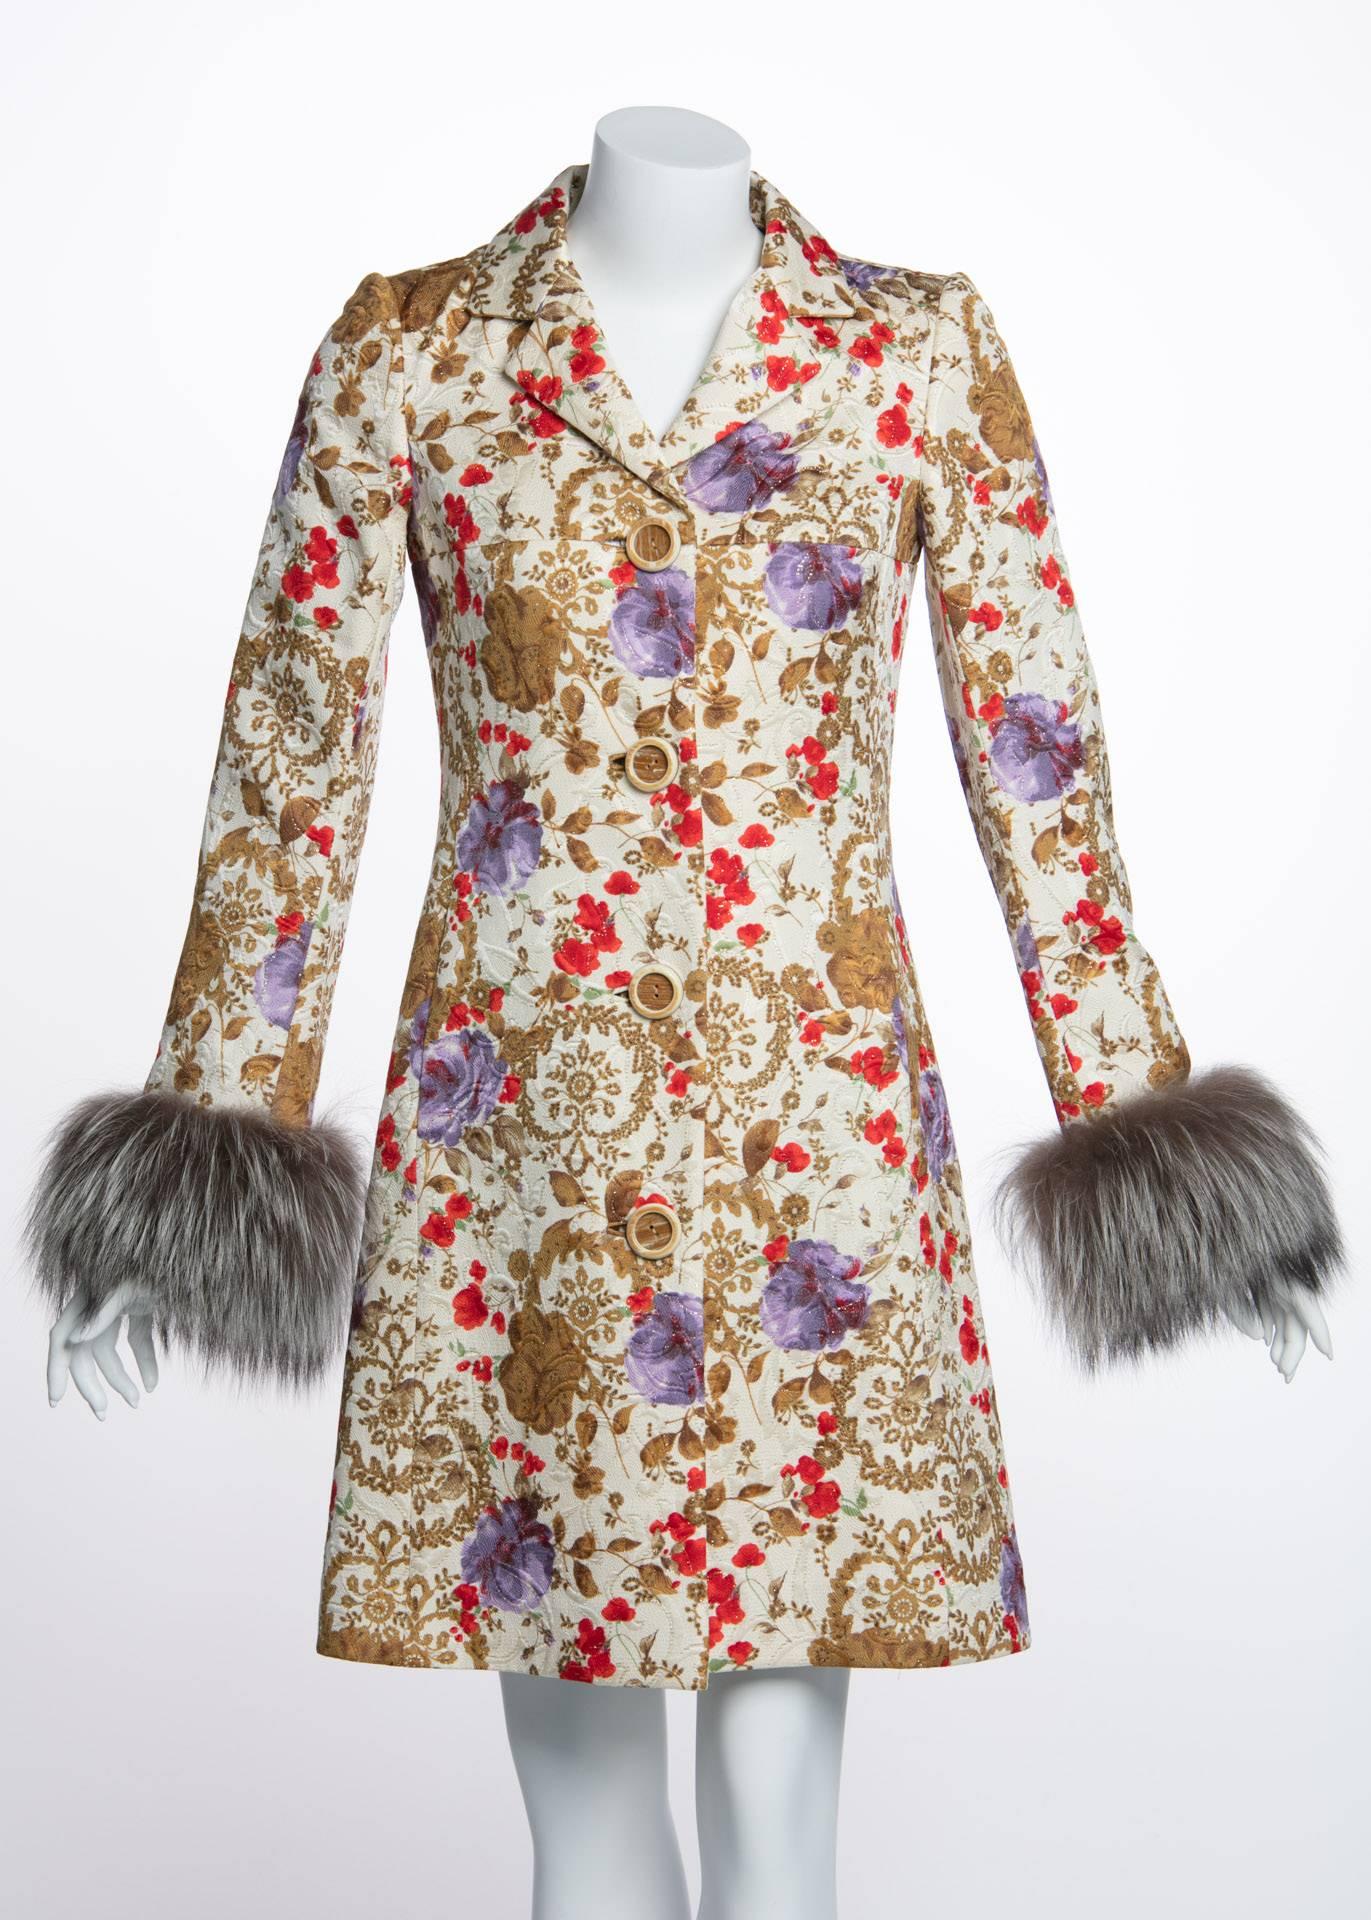 Dare to be feminine in this chic little coat by New York based Tuleh. Launched by Josh Patner and Bryan Bradley, their clothes “release the pink” in women. This beautifully detailed coat is made from a silk/wool blend brocade weave with an